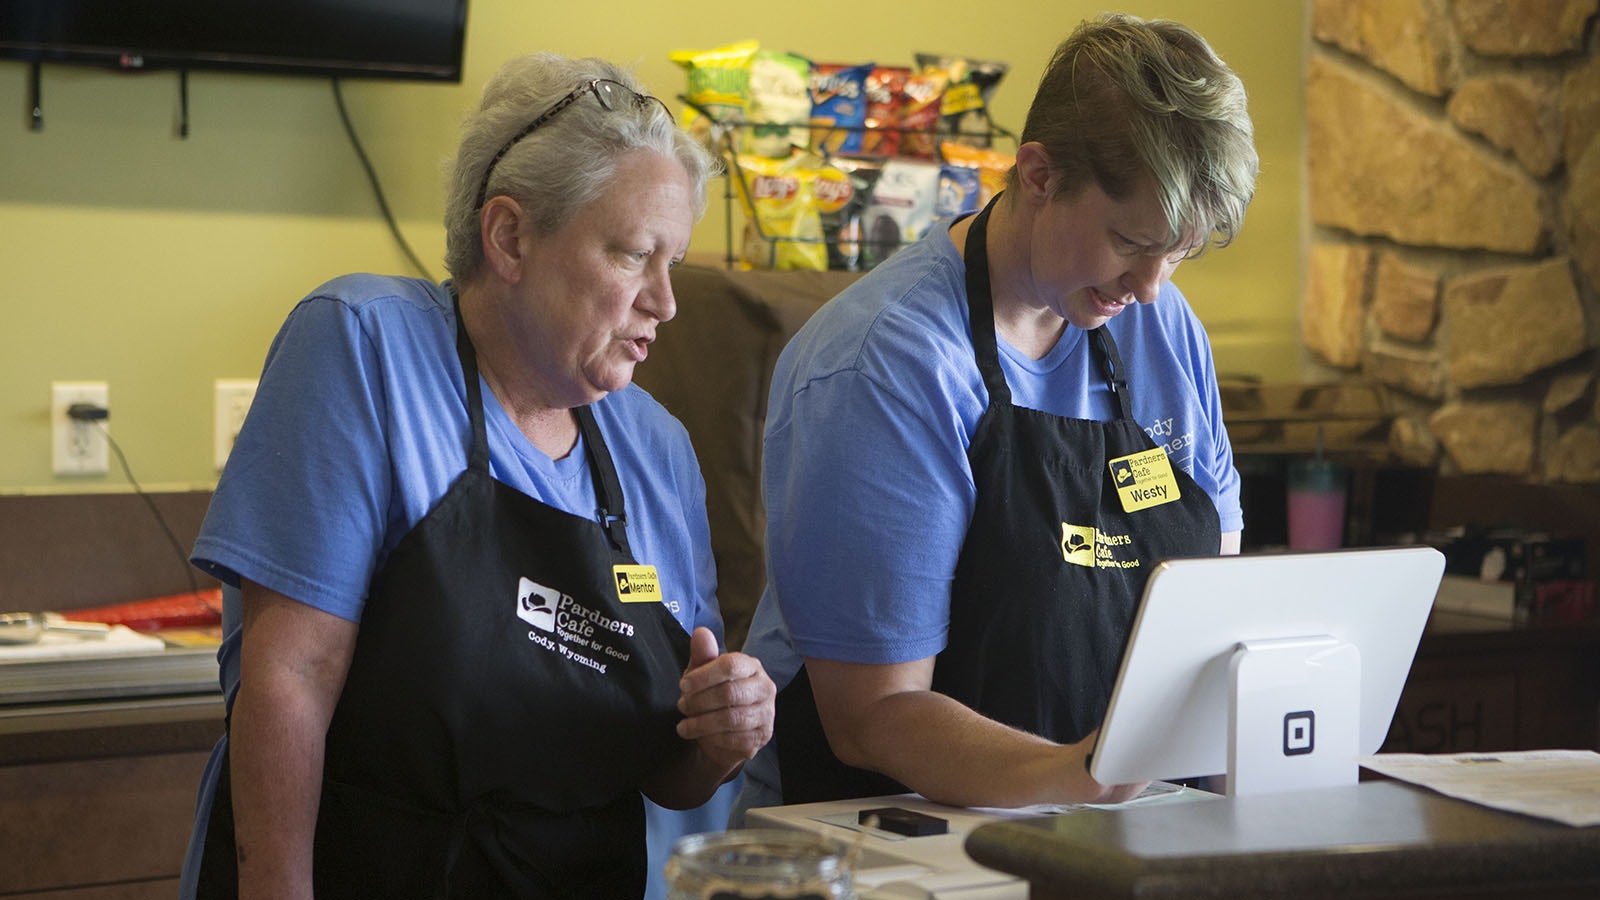 Mentor Maria Olmstead, left, works with pardner Westy Kline taking orders at the Pardners Cafe.